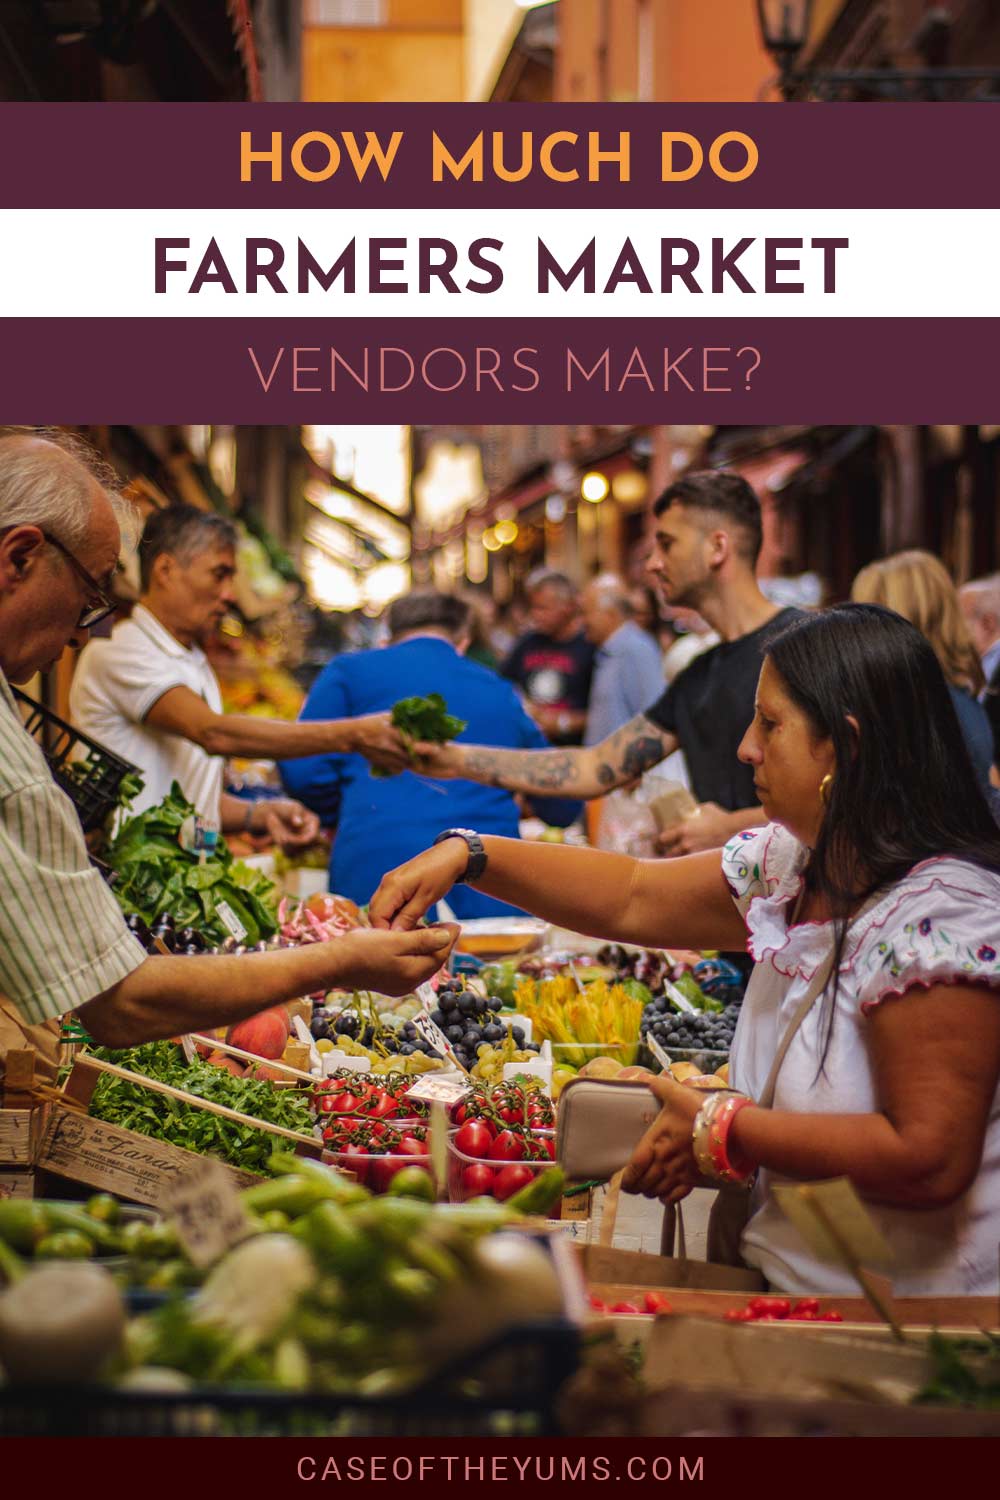 People buying and selling at a vegetable market - How Much Do Farmers Market Vendors Make?